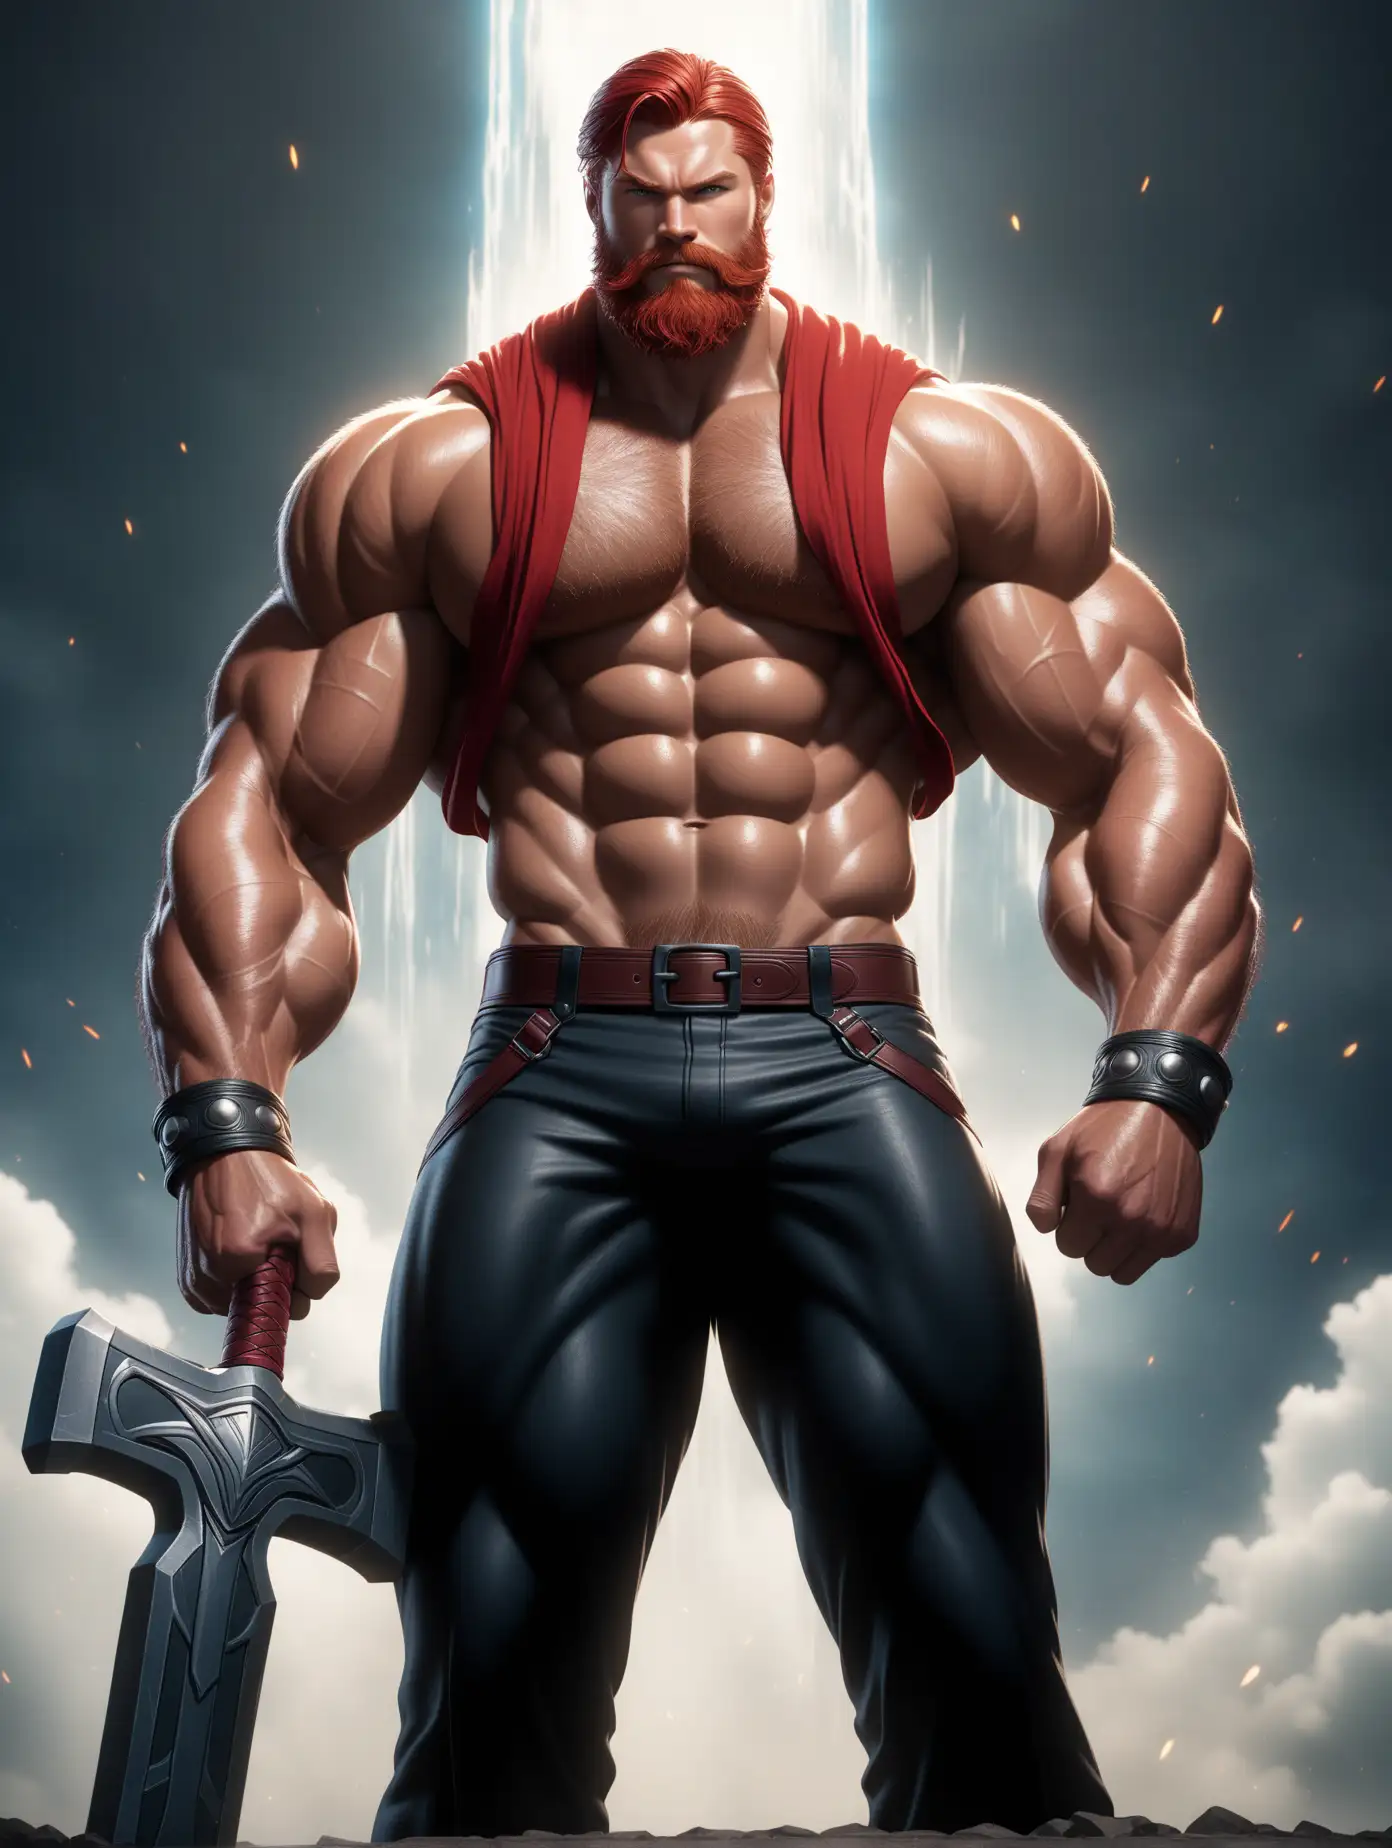 Thor from Record of Ragnarok UltraRealistic Muscular God with Mjolnir and Stormbreaker